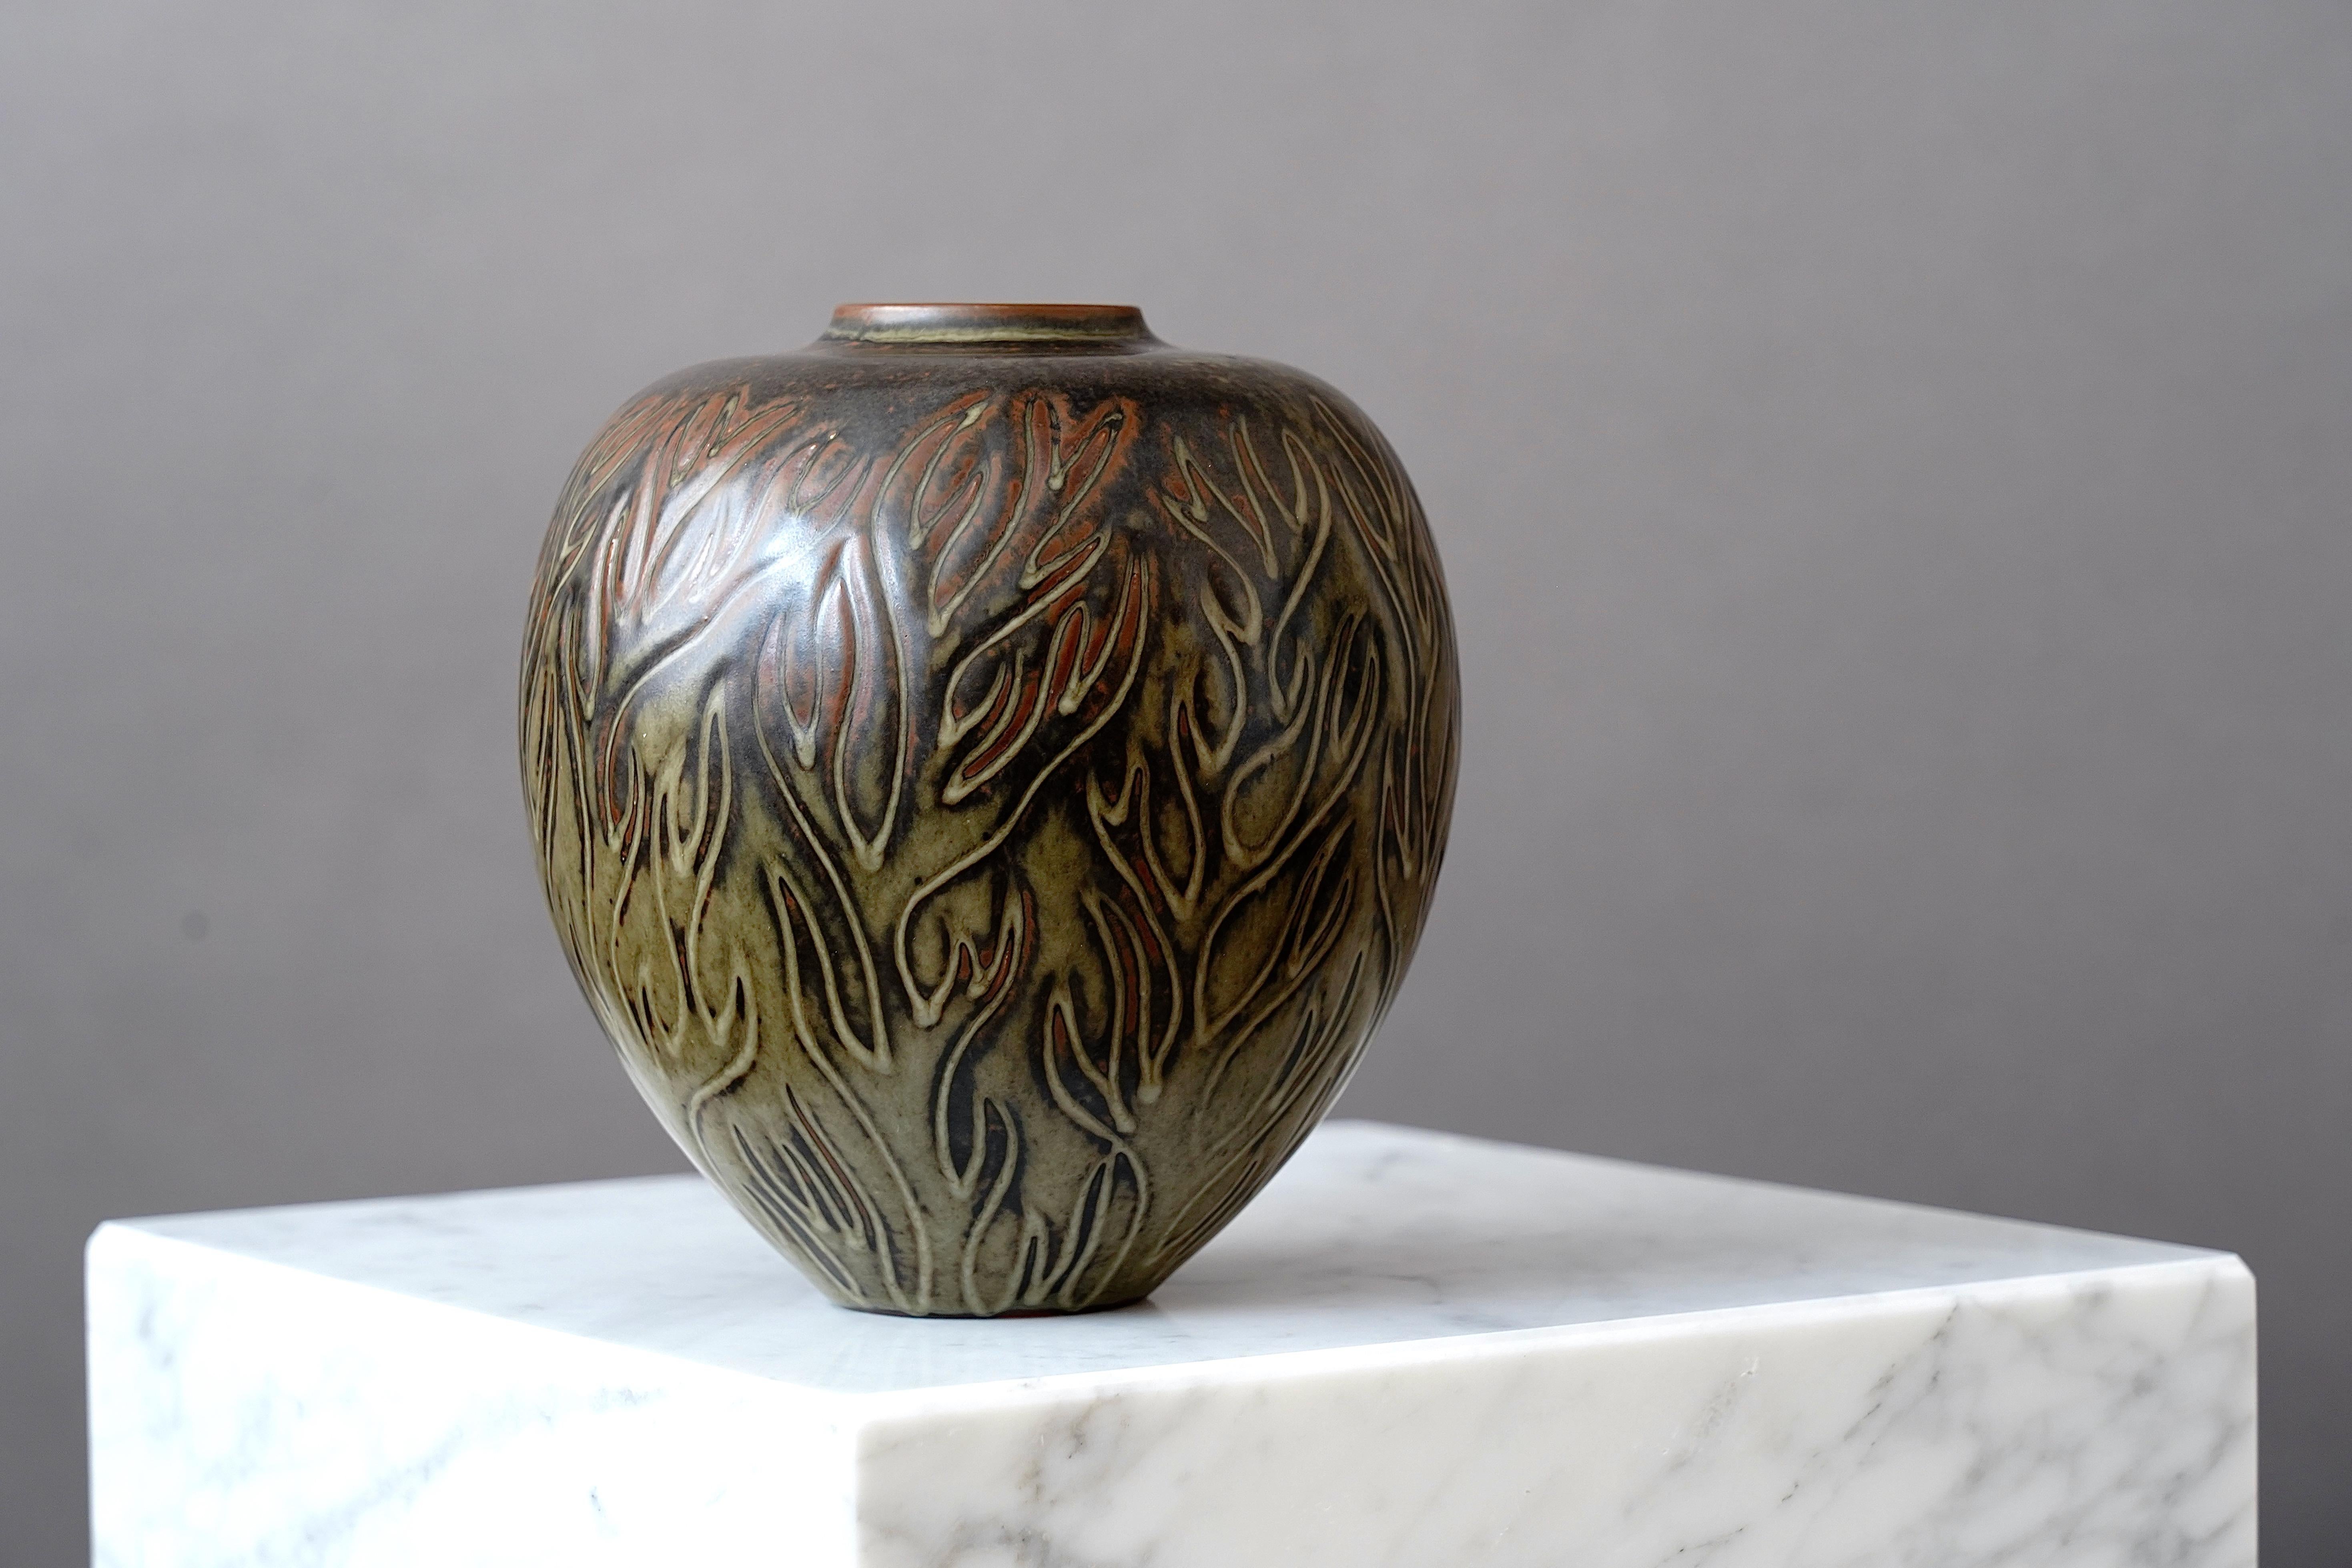 A beautiful stoneware vase with amazing sung glaze.
Made by Gerd Bogelund for Royal Copenhagen, Denmark.

Great condition. Painted monogram signature 